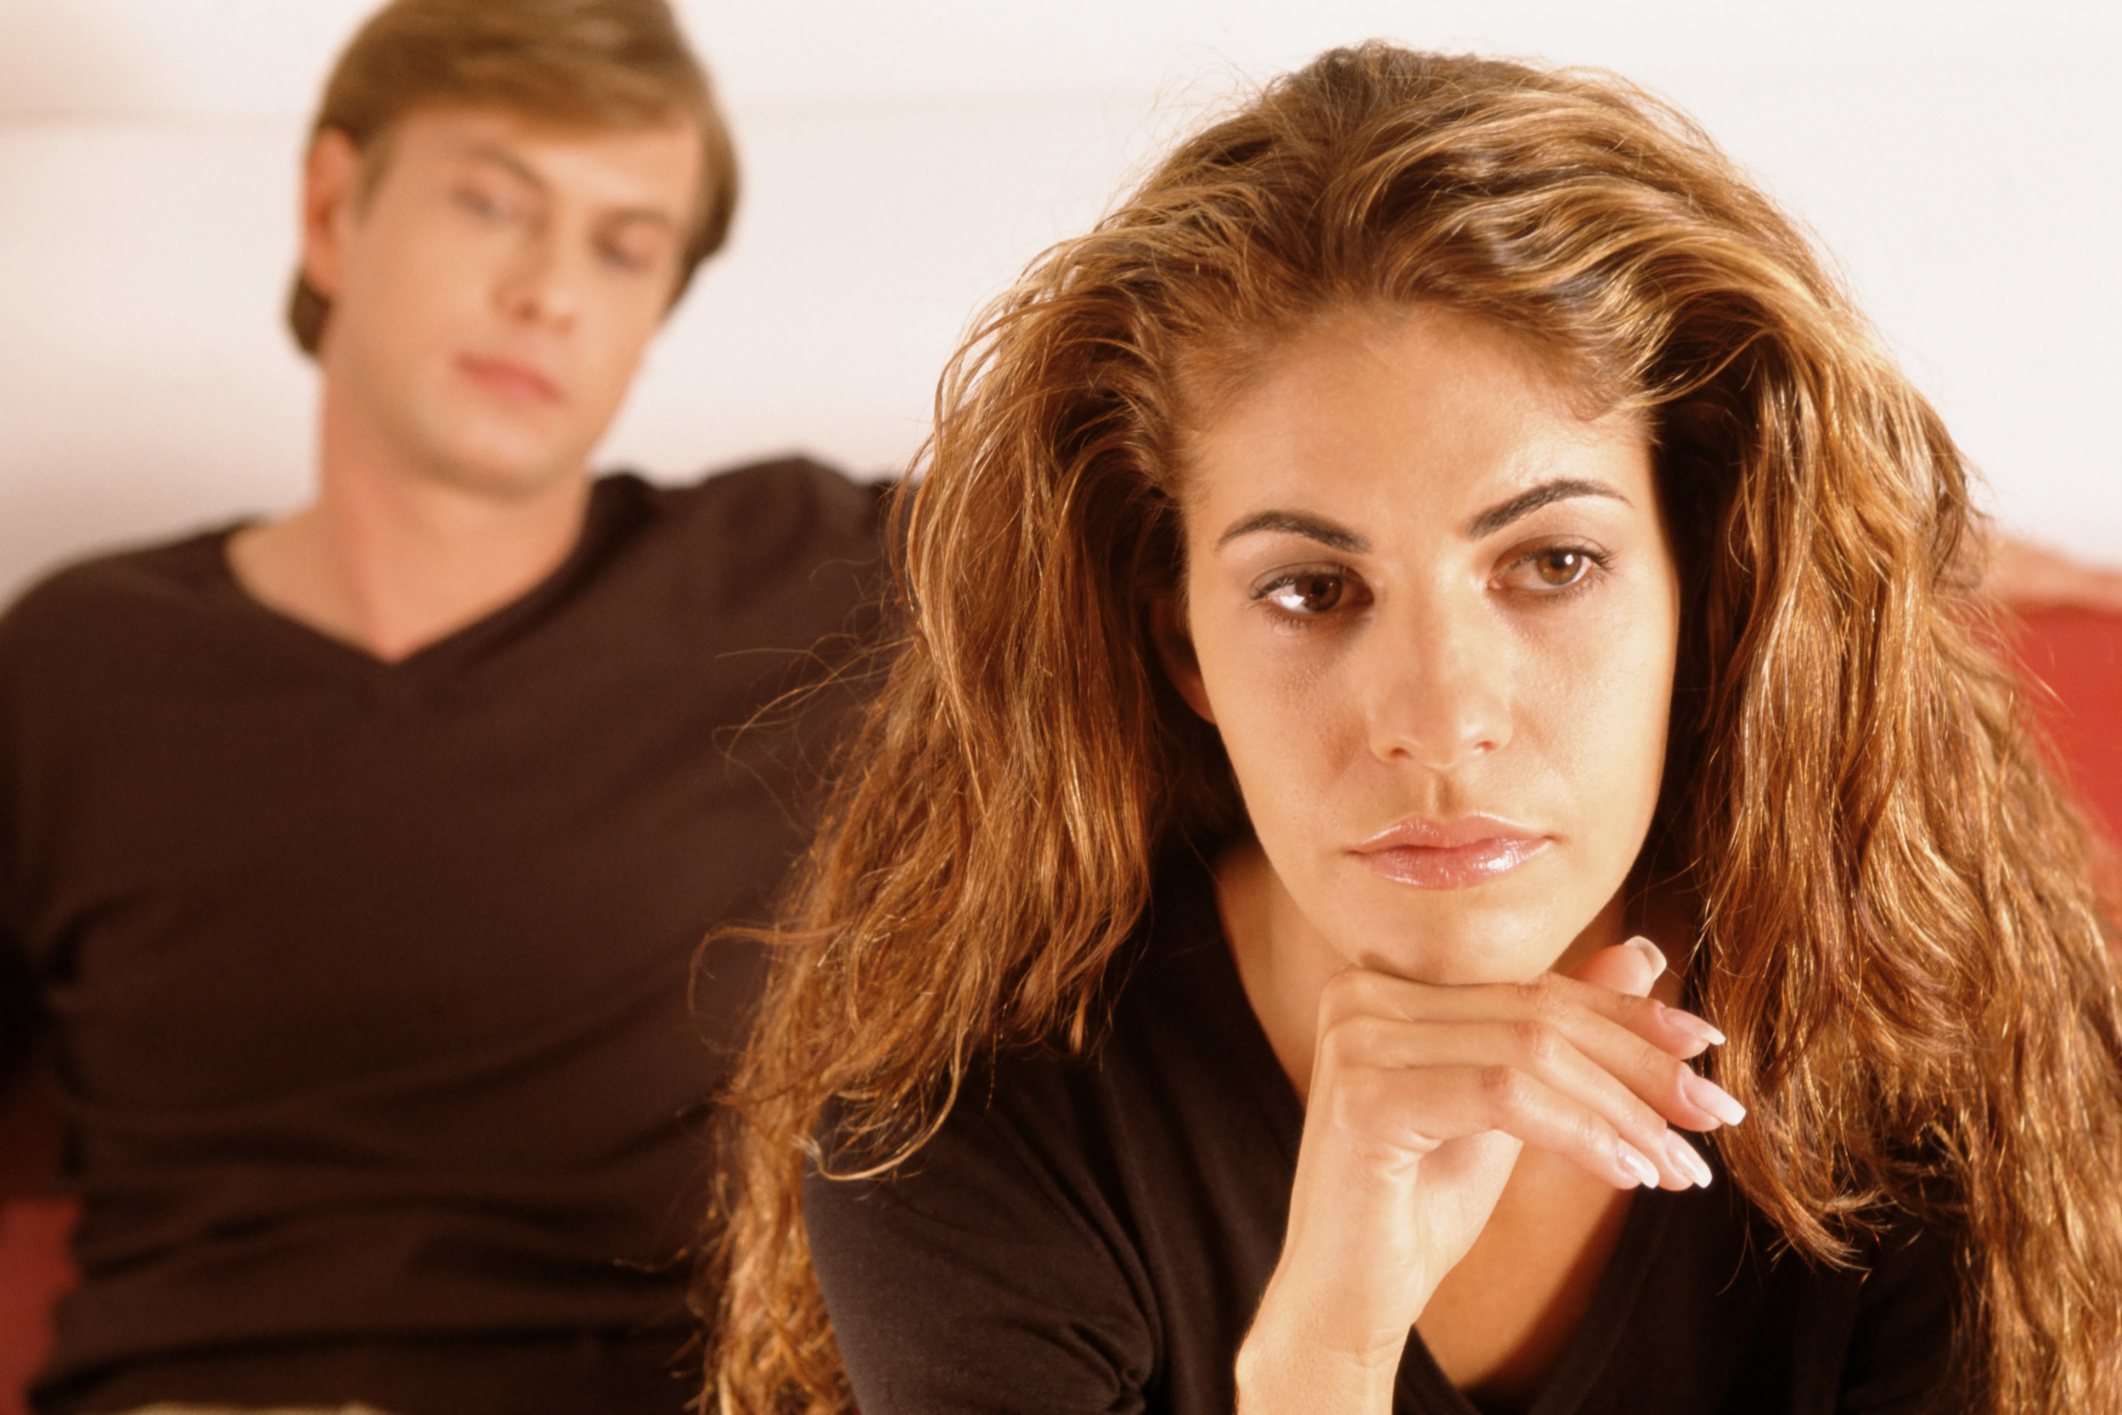 Coping with addiction triggers in romantic relationships